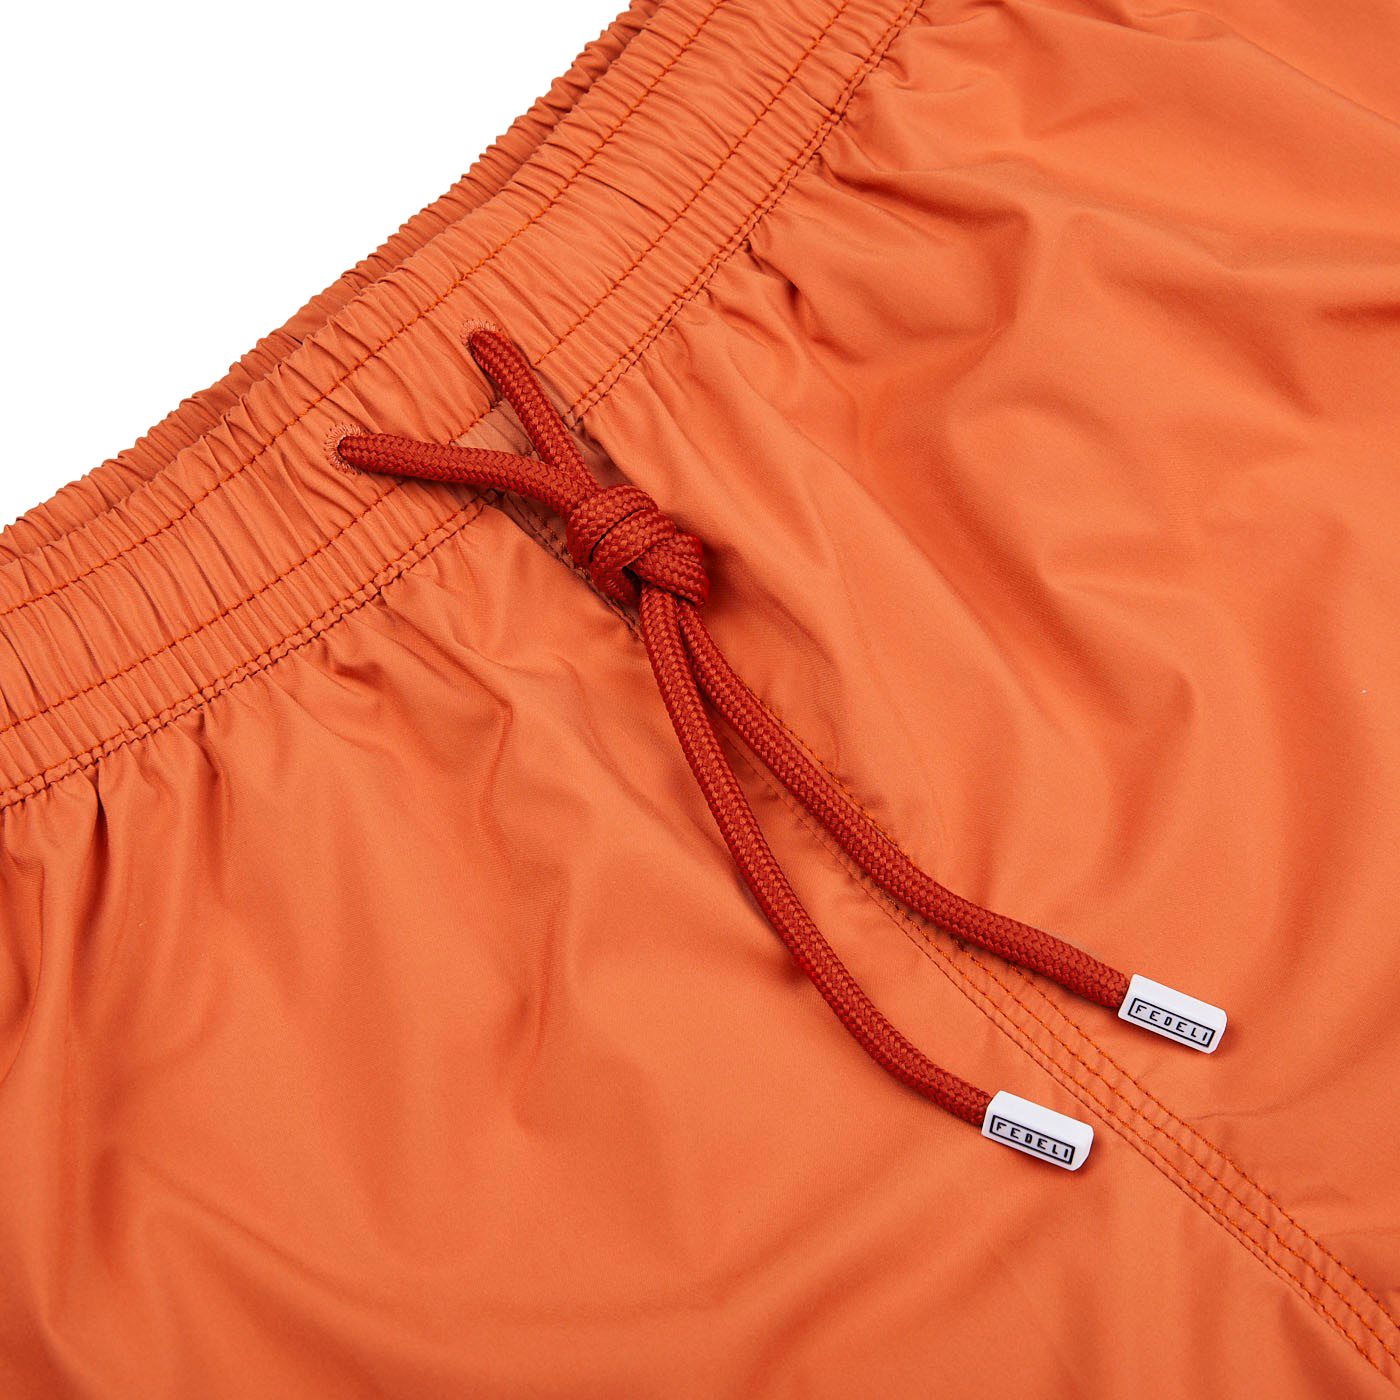 Fedeli Rust Brown Microfiber Madeira Swim Shorts with a drawstring and mesh lining.